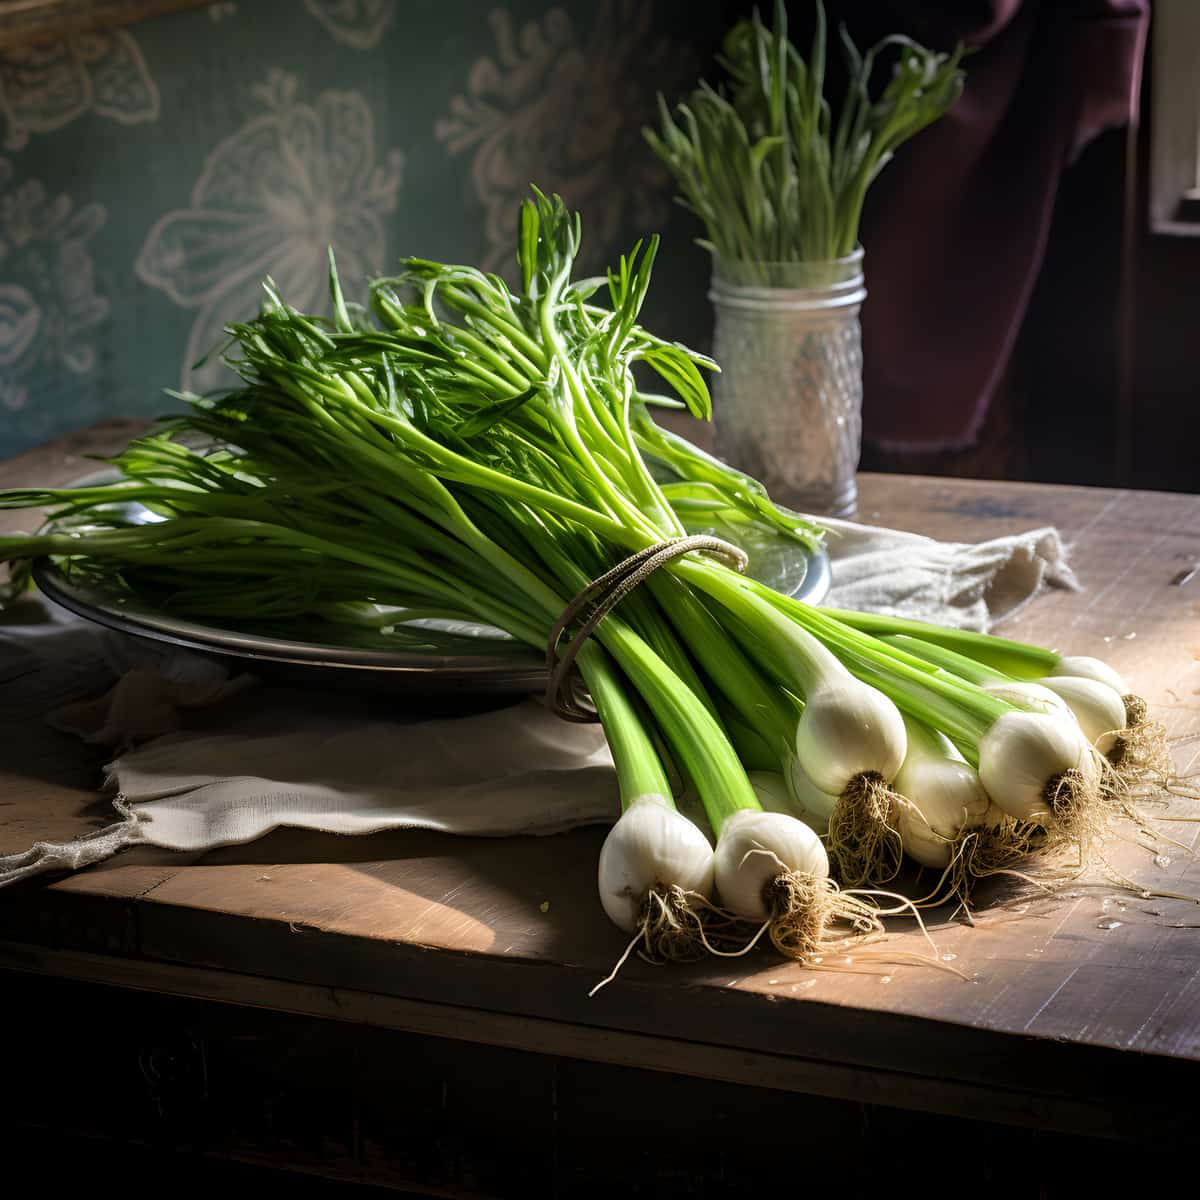 Spring Onion on a kitchen counter